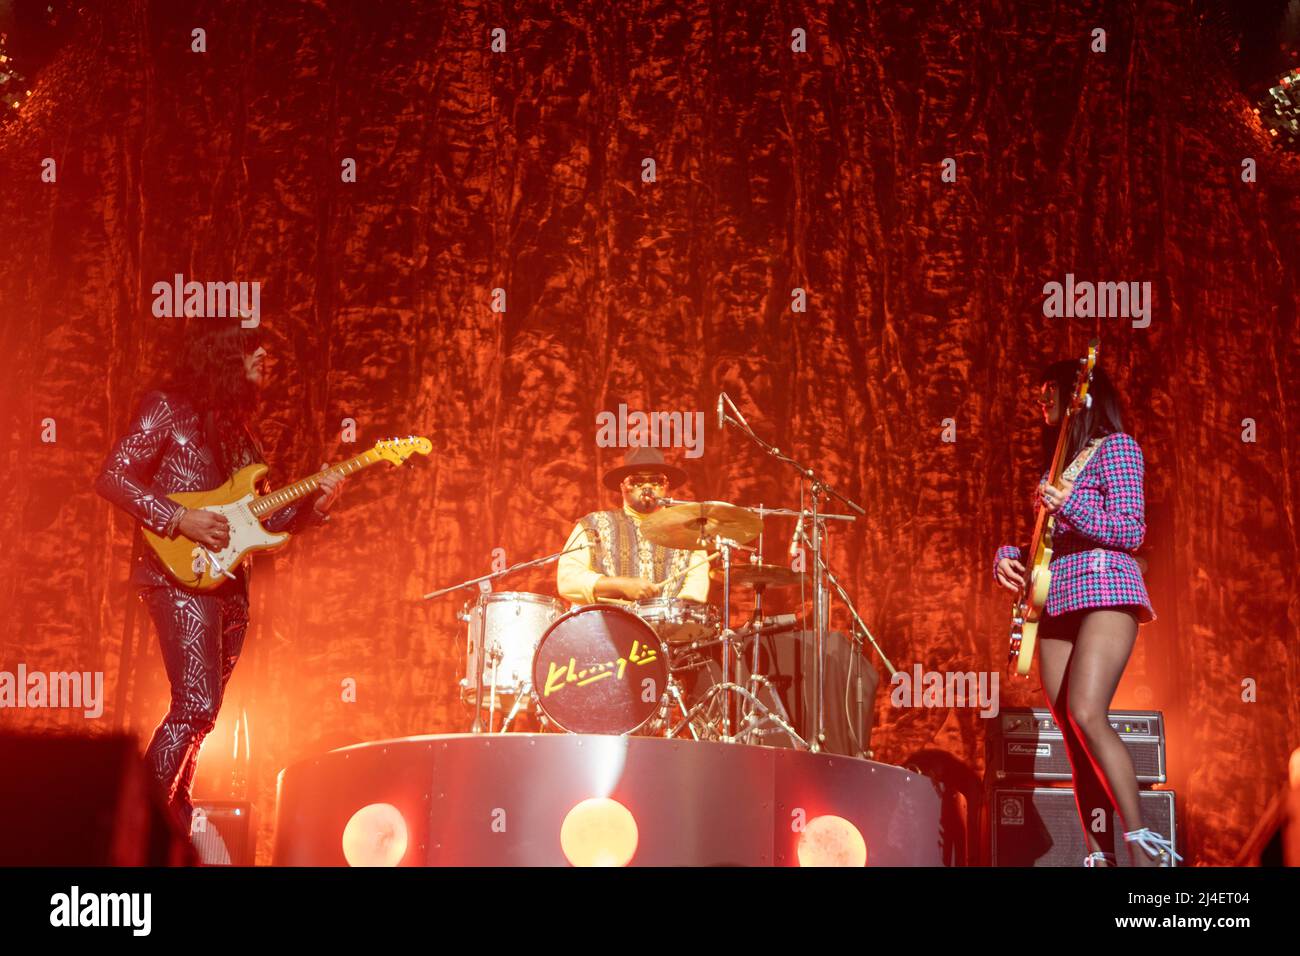 London, UK. April 14th, 2022. Khruangbin performing live on stage at Alexandra Palace in London. Photo: Richard Gray/Alamy Stock Photo